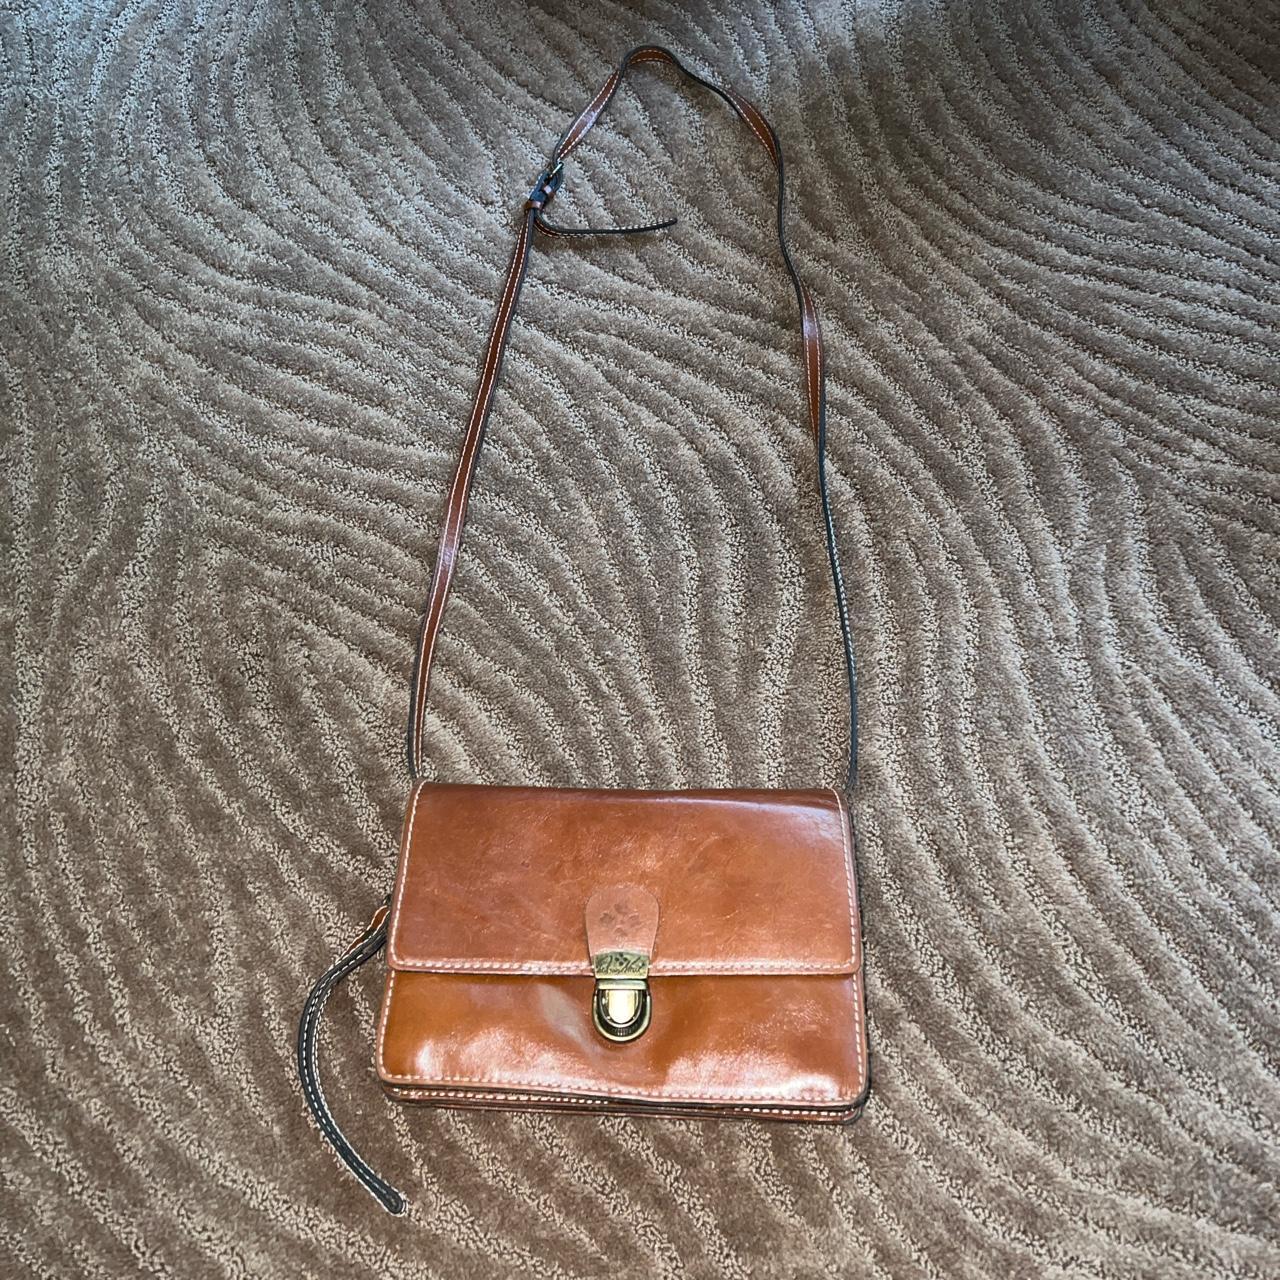 authentic Patricia Nash crossbody bag real leather... - Depop